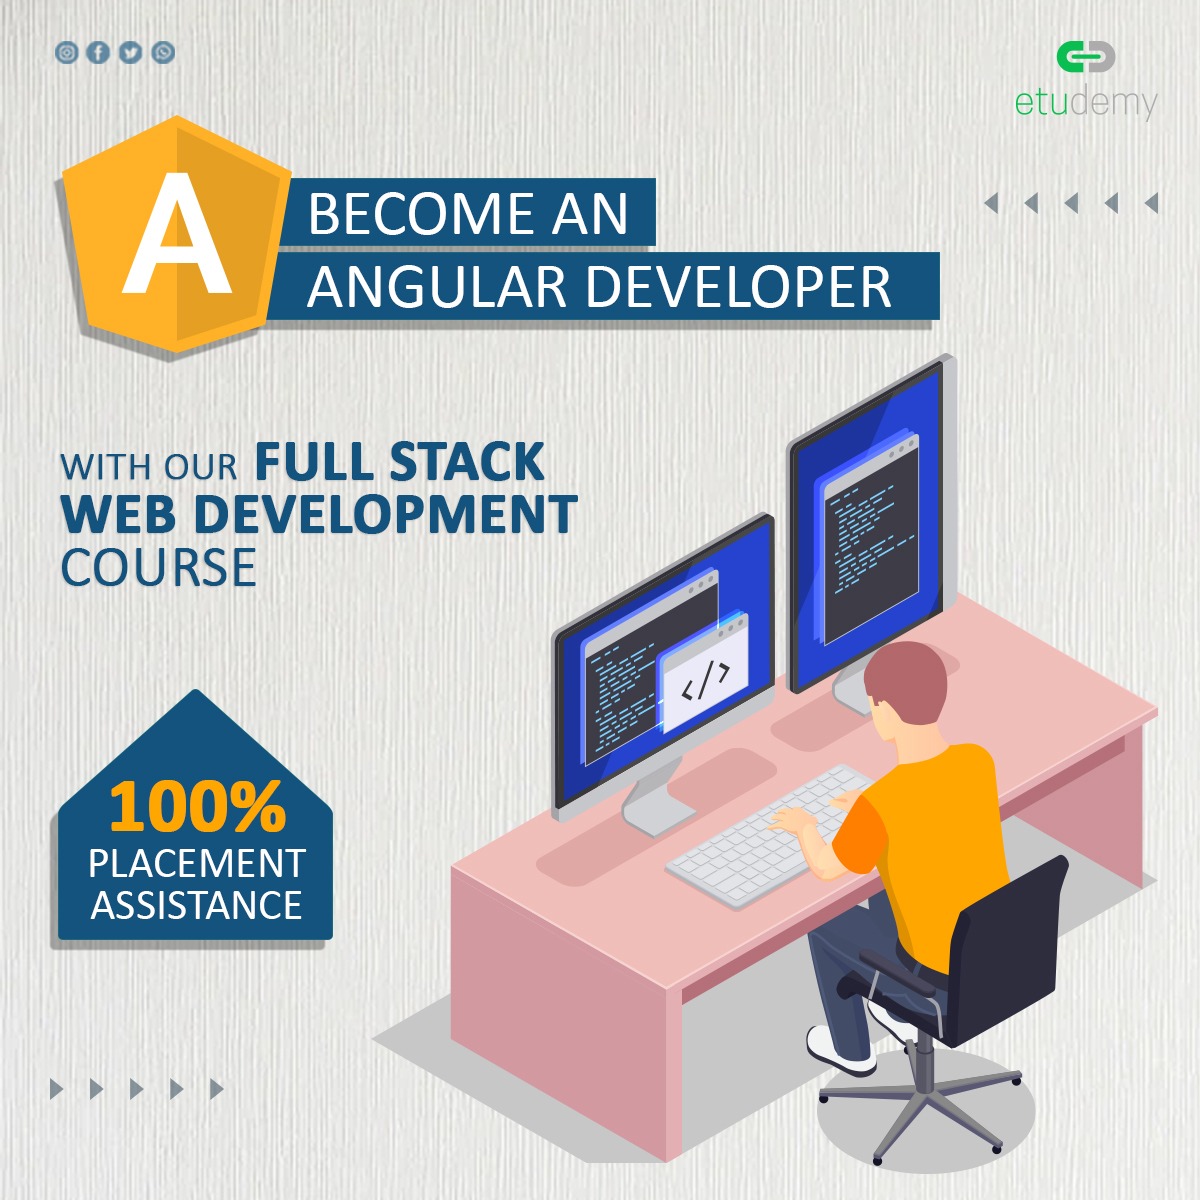 Full Stack Web Developer Course With Placement